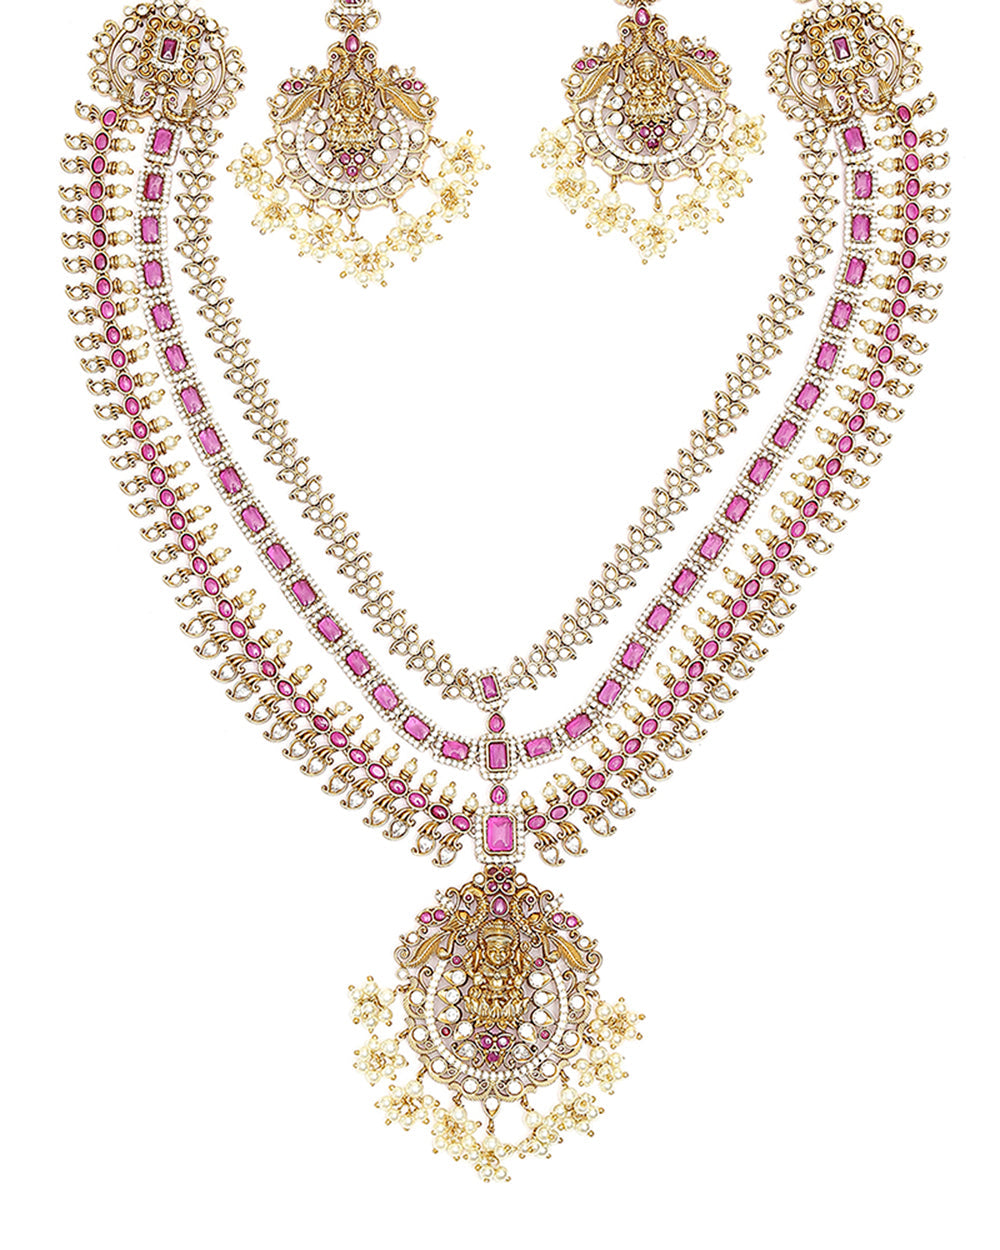 Women's Antique Inspired Opulent Cz And Faux Pearls Multi-Strand Brass Gold Plated Jewellery Set - Voylla